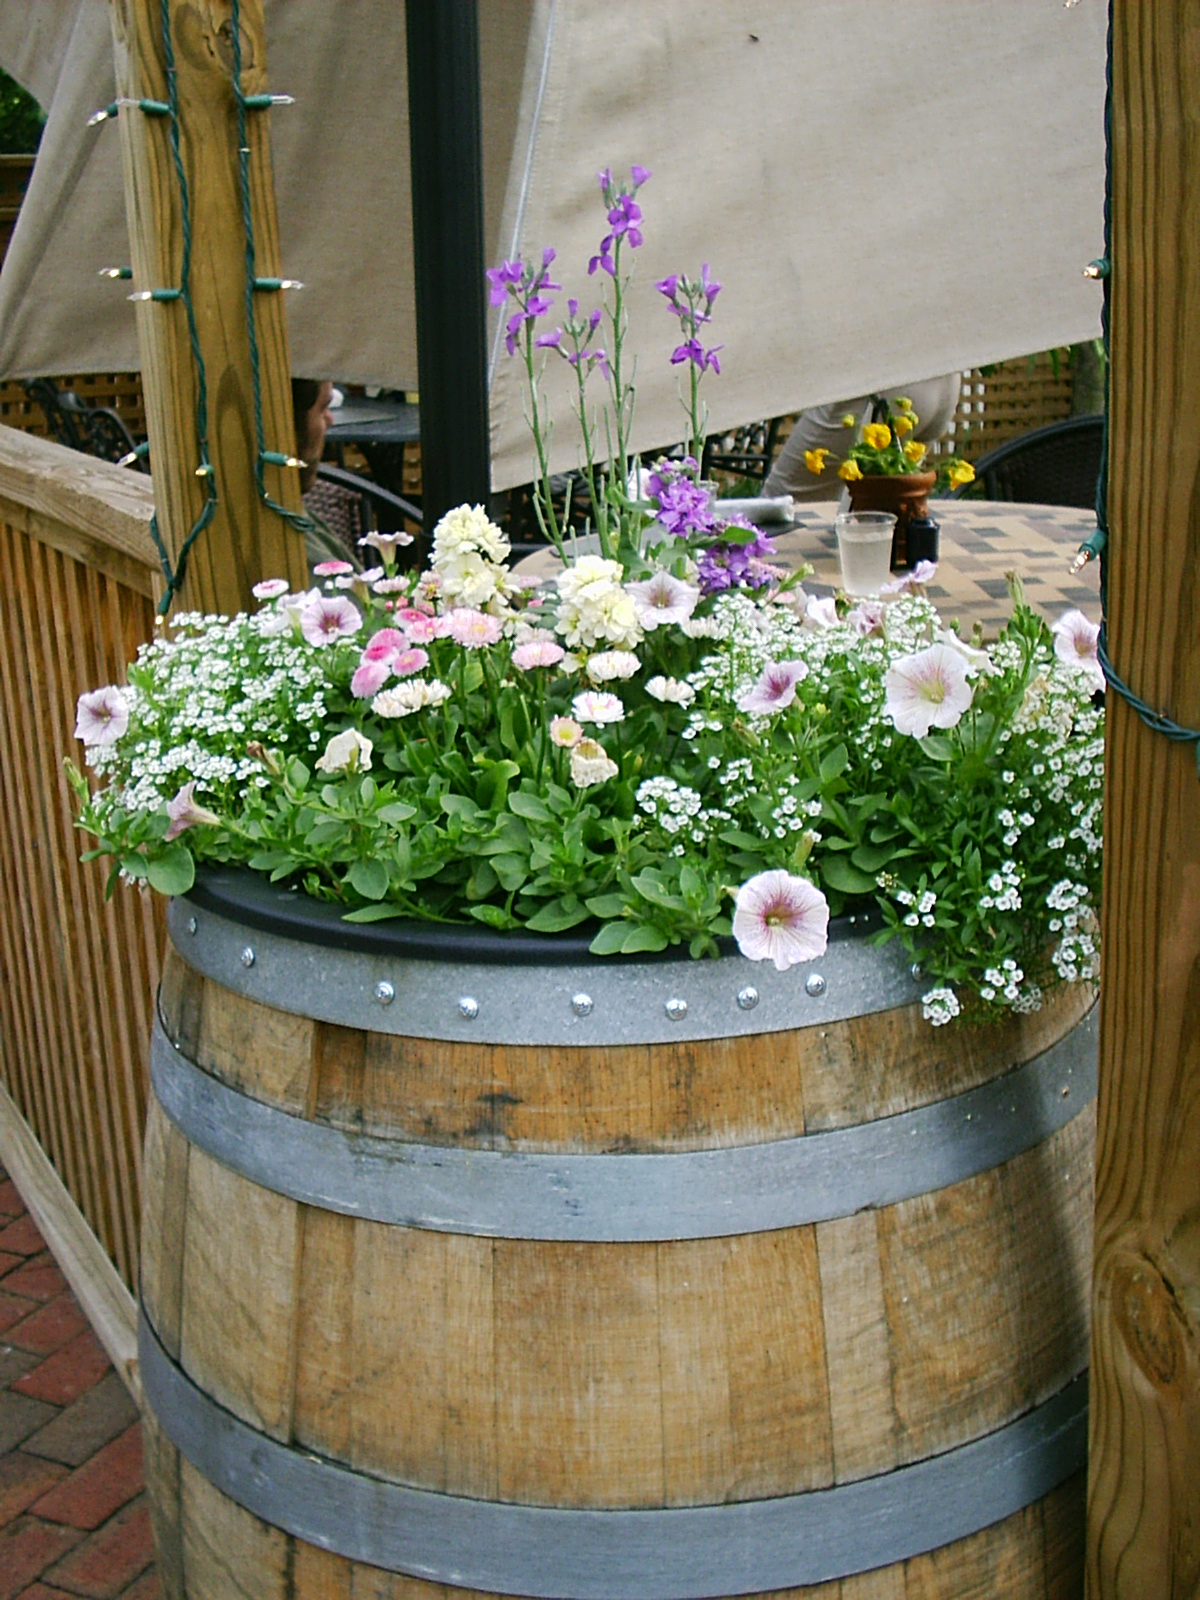 Flowers in a barrel, Barrel, Bloom, Blossom, Floral, HQ Photo